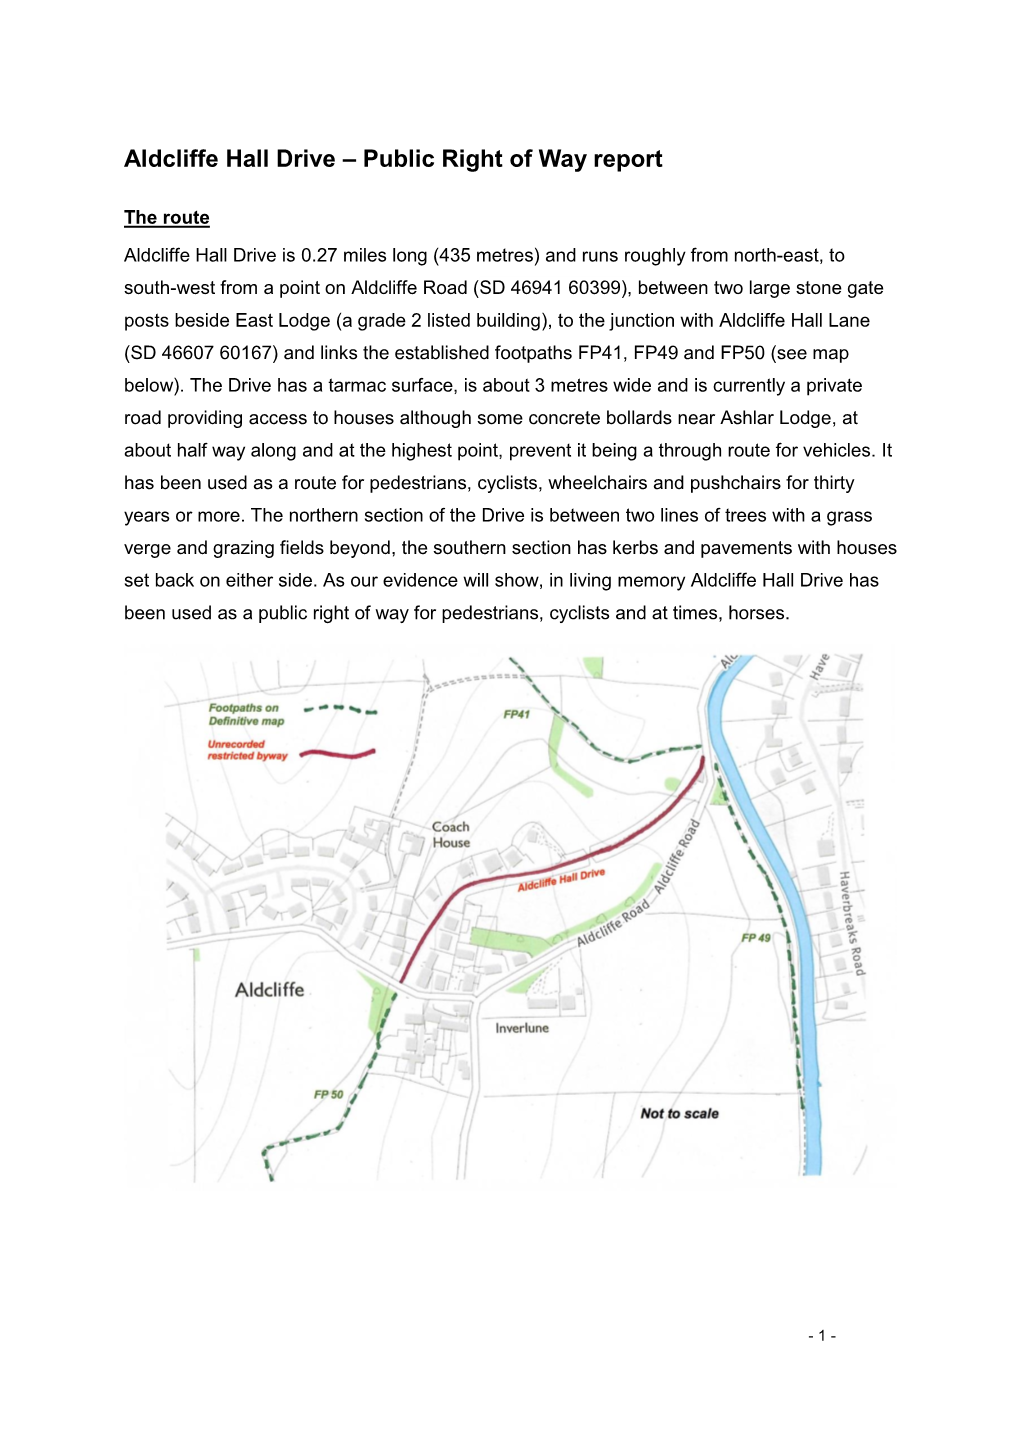 Aldcliffe Hall Drive – Public Right of Way Report